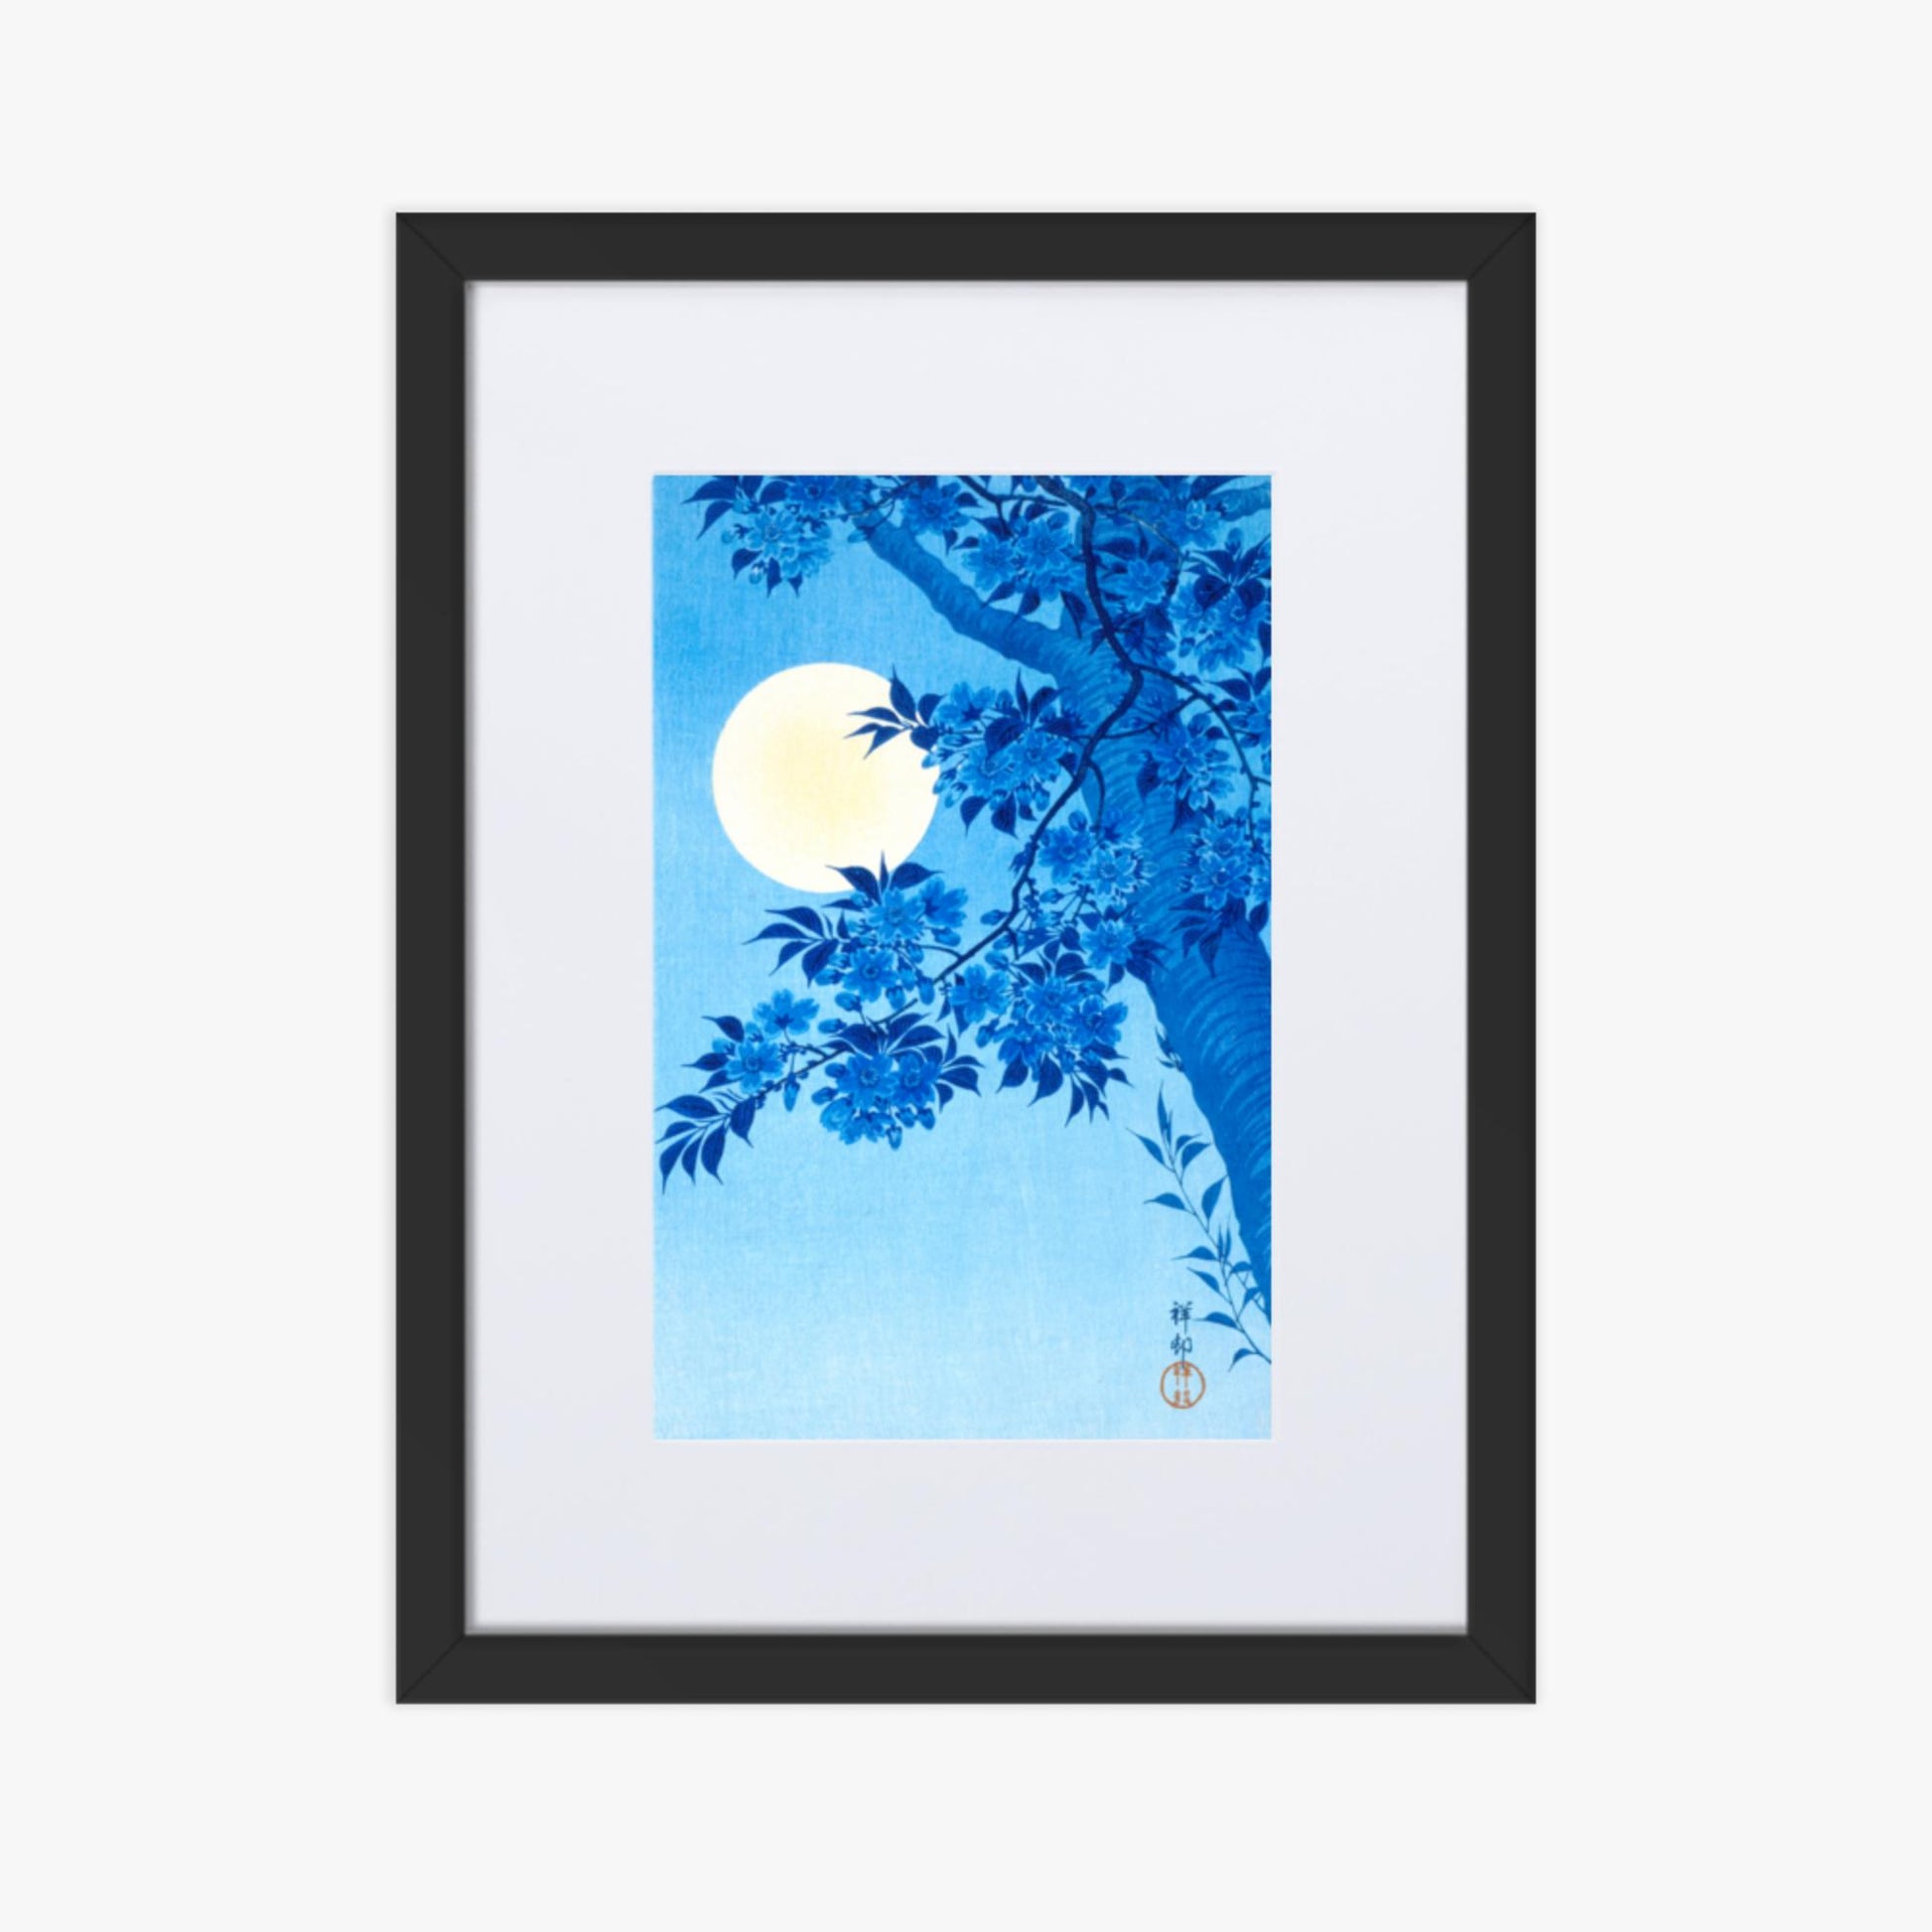 Ohara Koson - Blossoming Cherry on a Moonlit Night 30x40 cm Poster With Black Frame